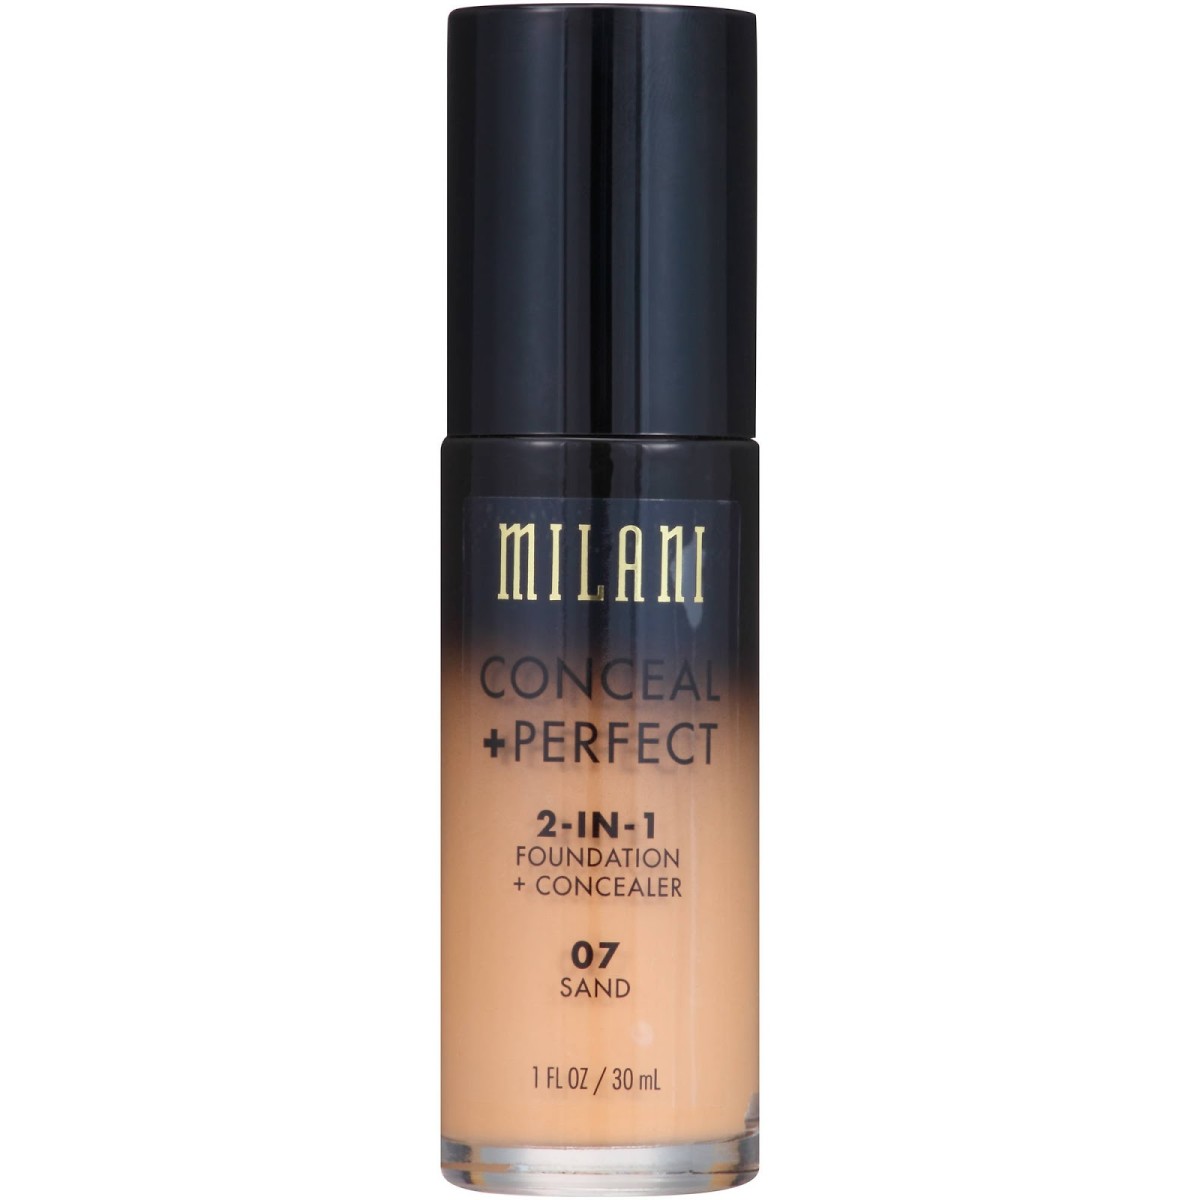 Review of the Milani Conceal + Perfect 2-in-1 Foundation + Concealer